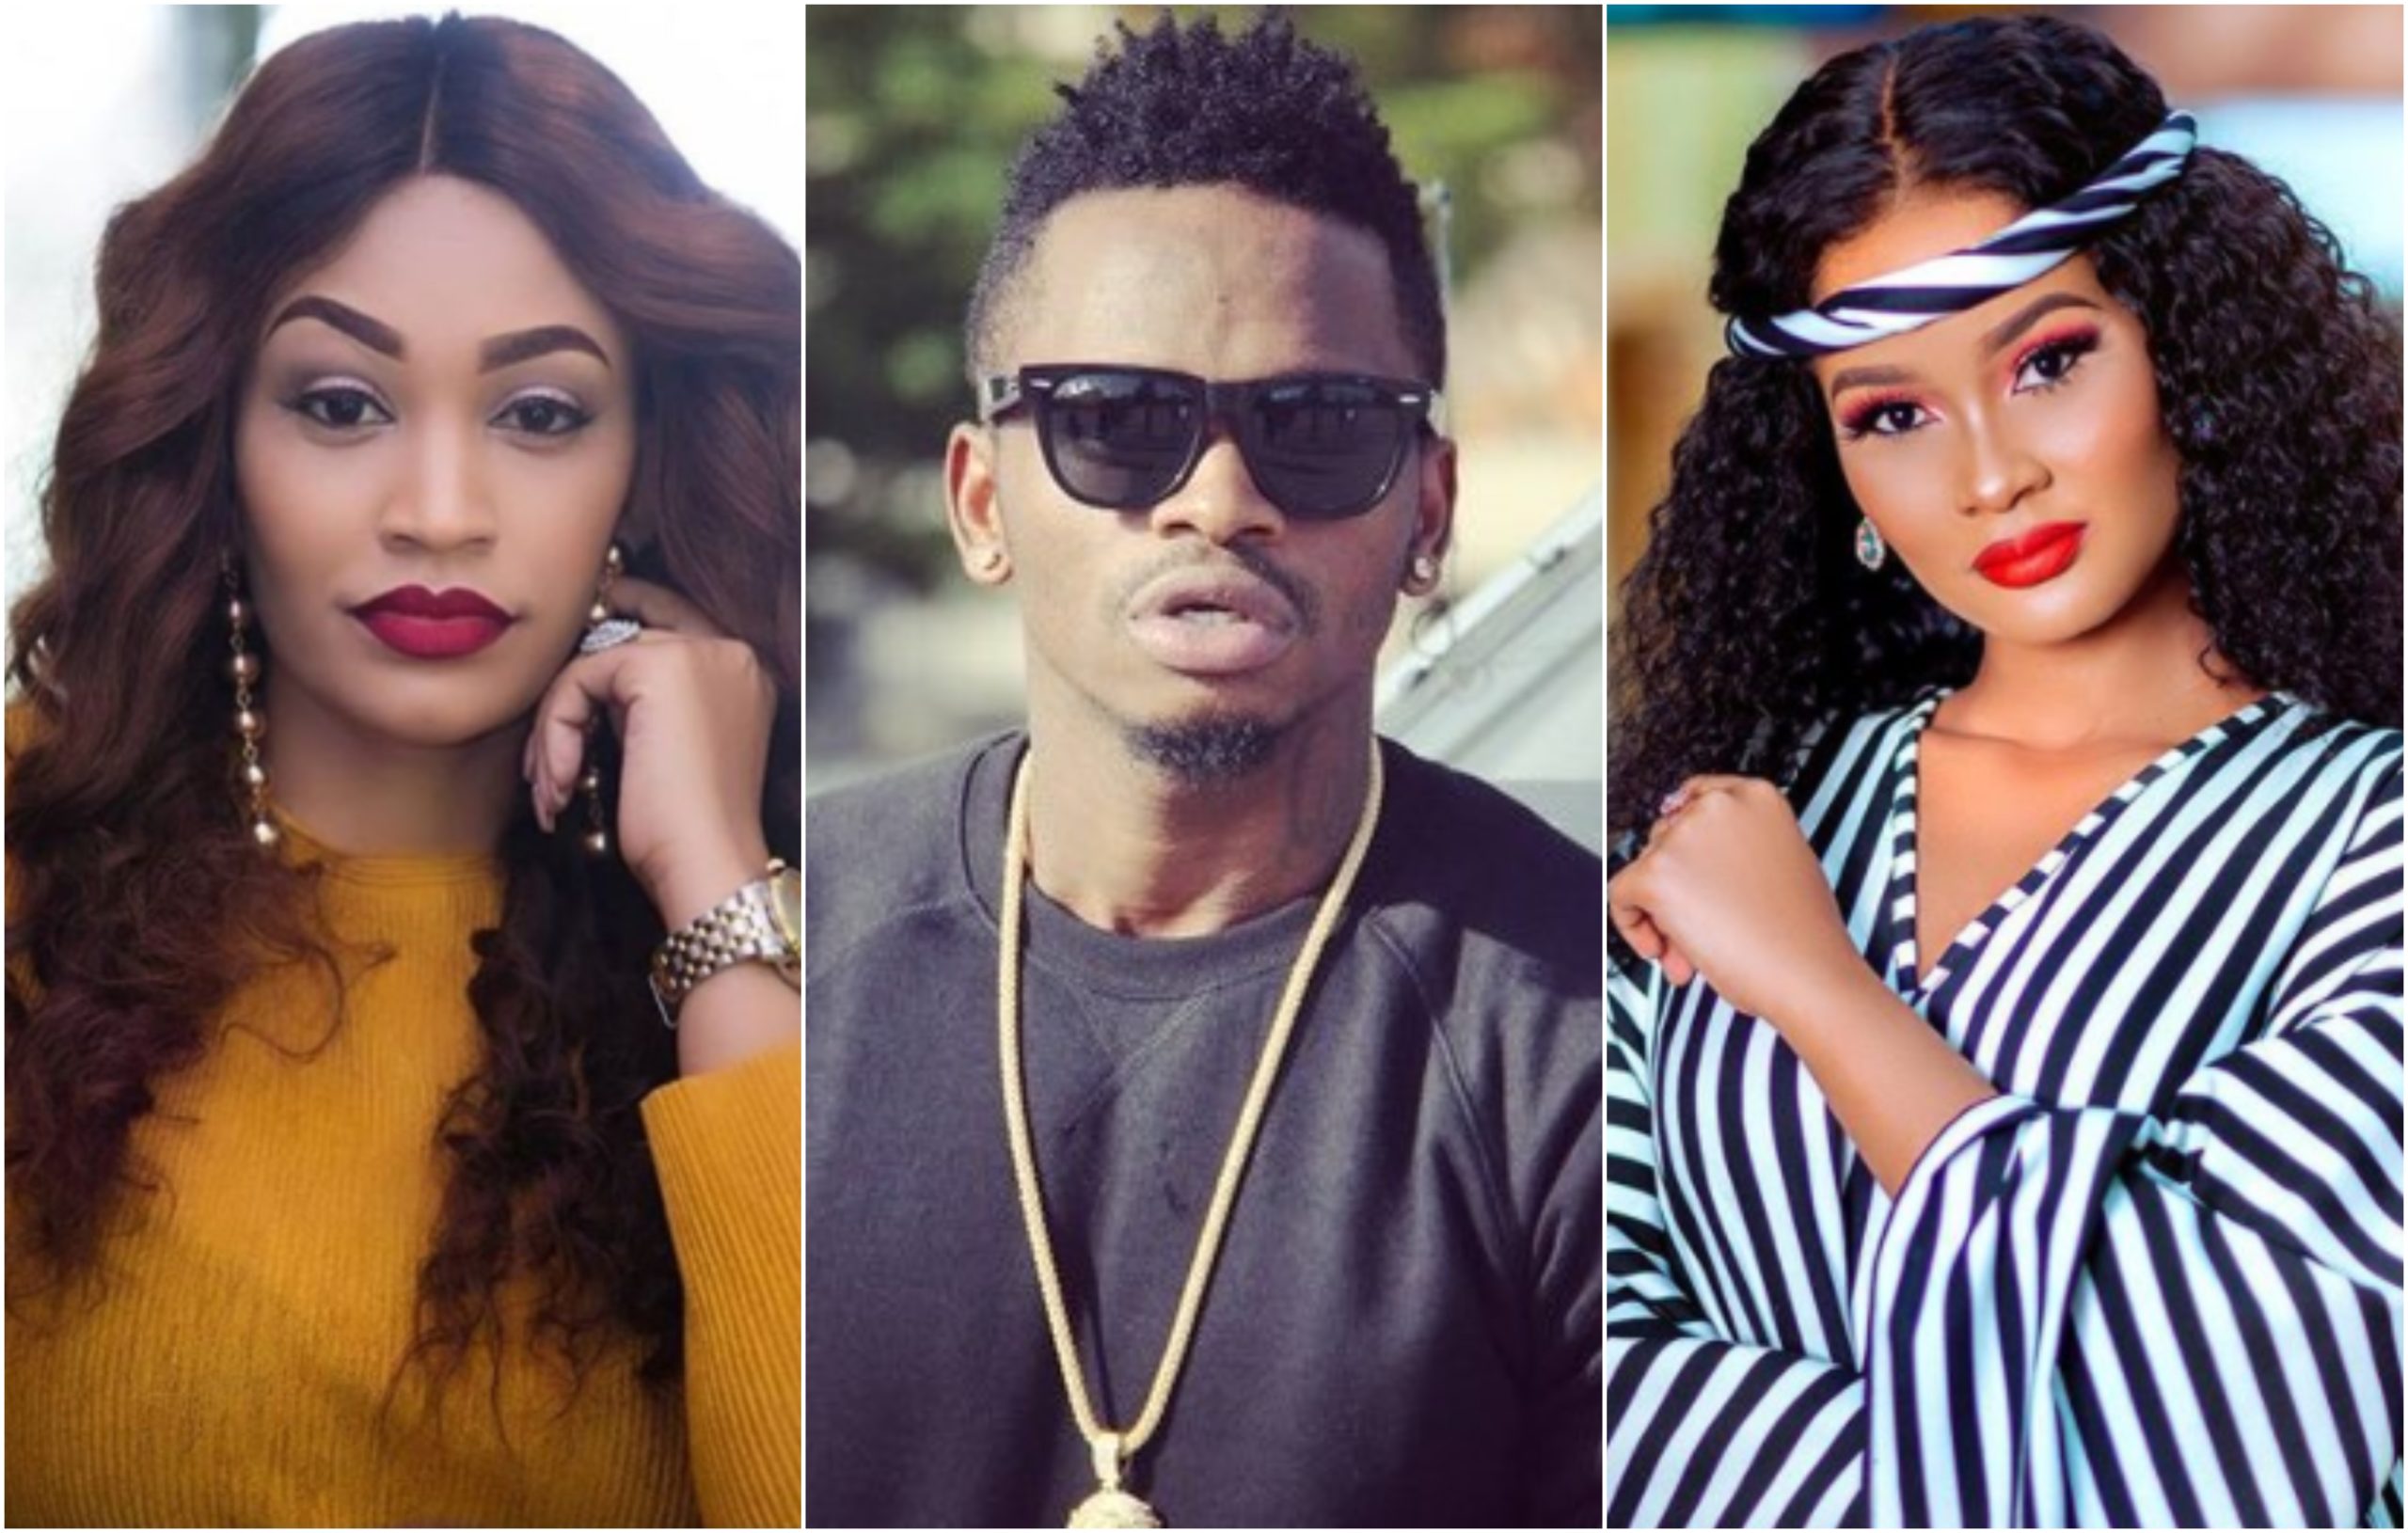 Payback? Hamisa Mobetto flaunts new ride days after Diamond gifted Zari brand new Bentley (Videos)